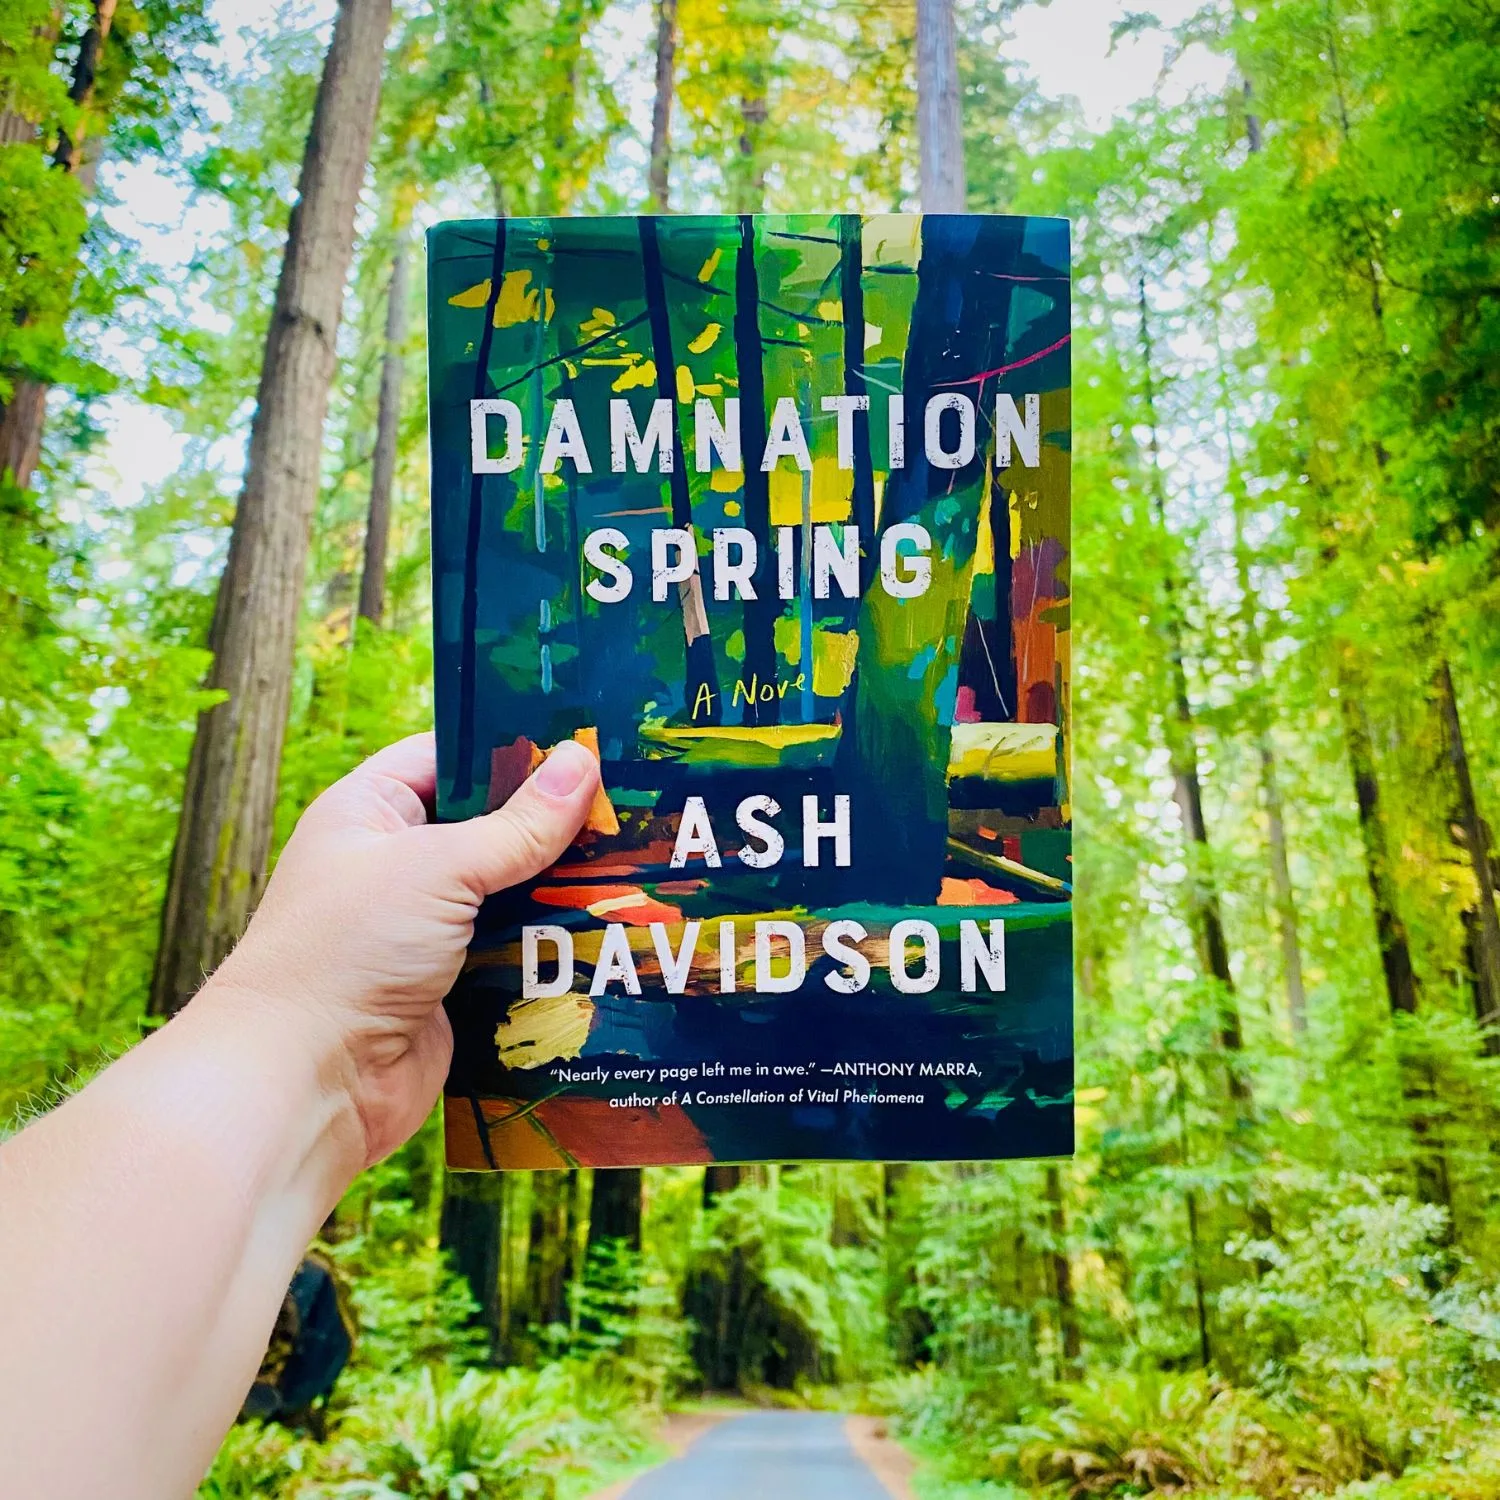 Damnation Spring book cover held in front of redwood trees